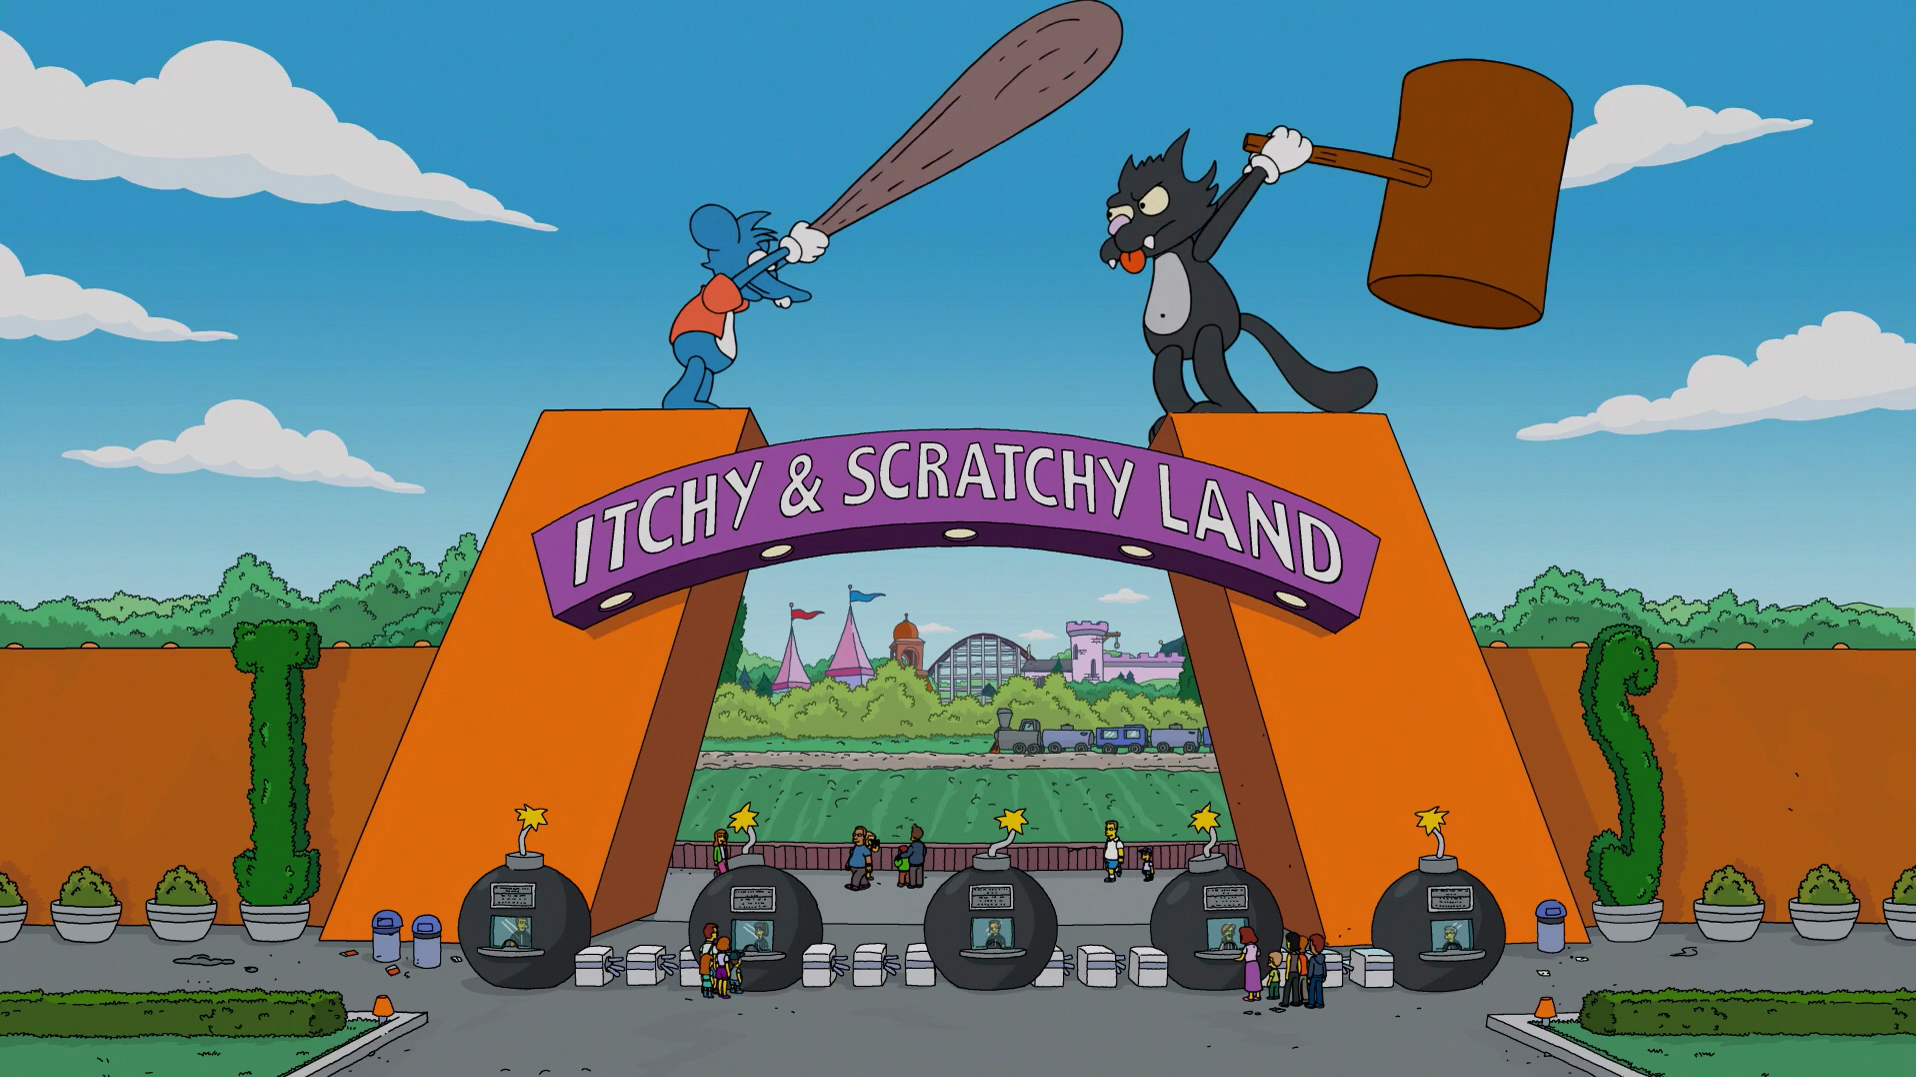 Itchy_%26_Scratchy_Land_gate.png